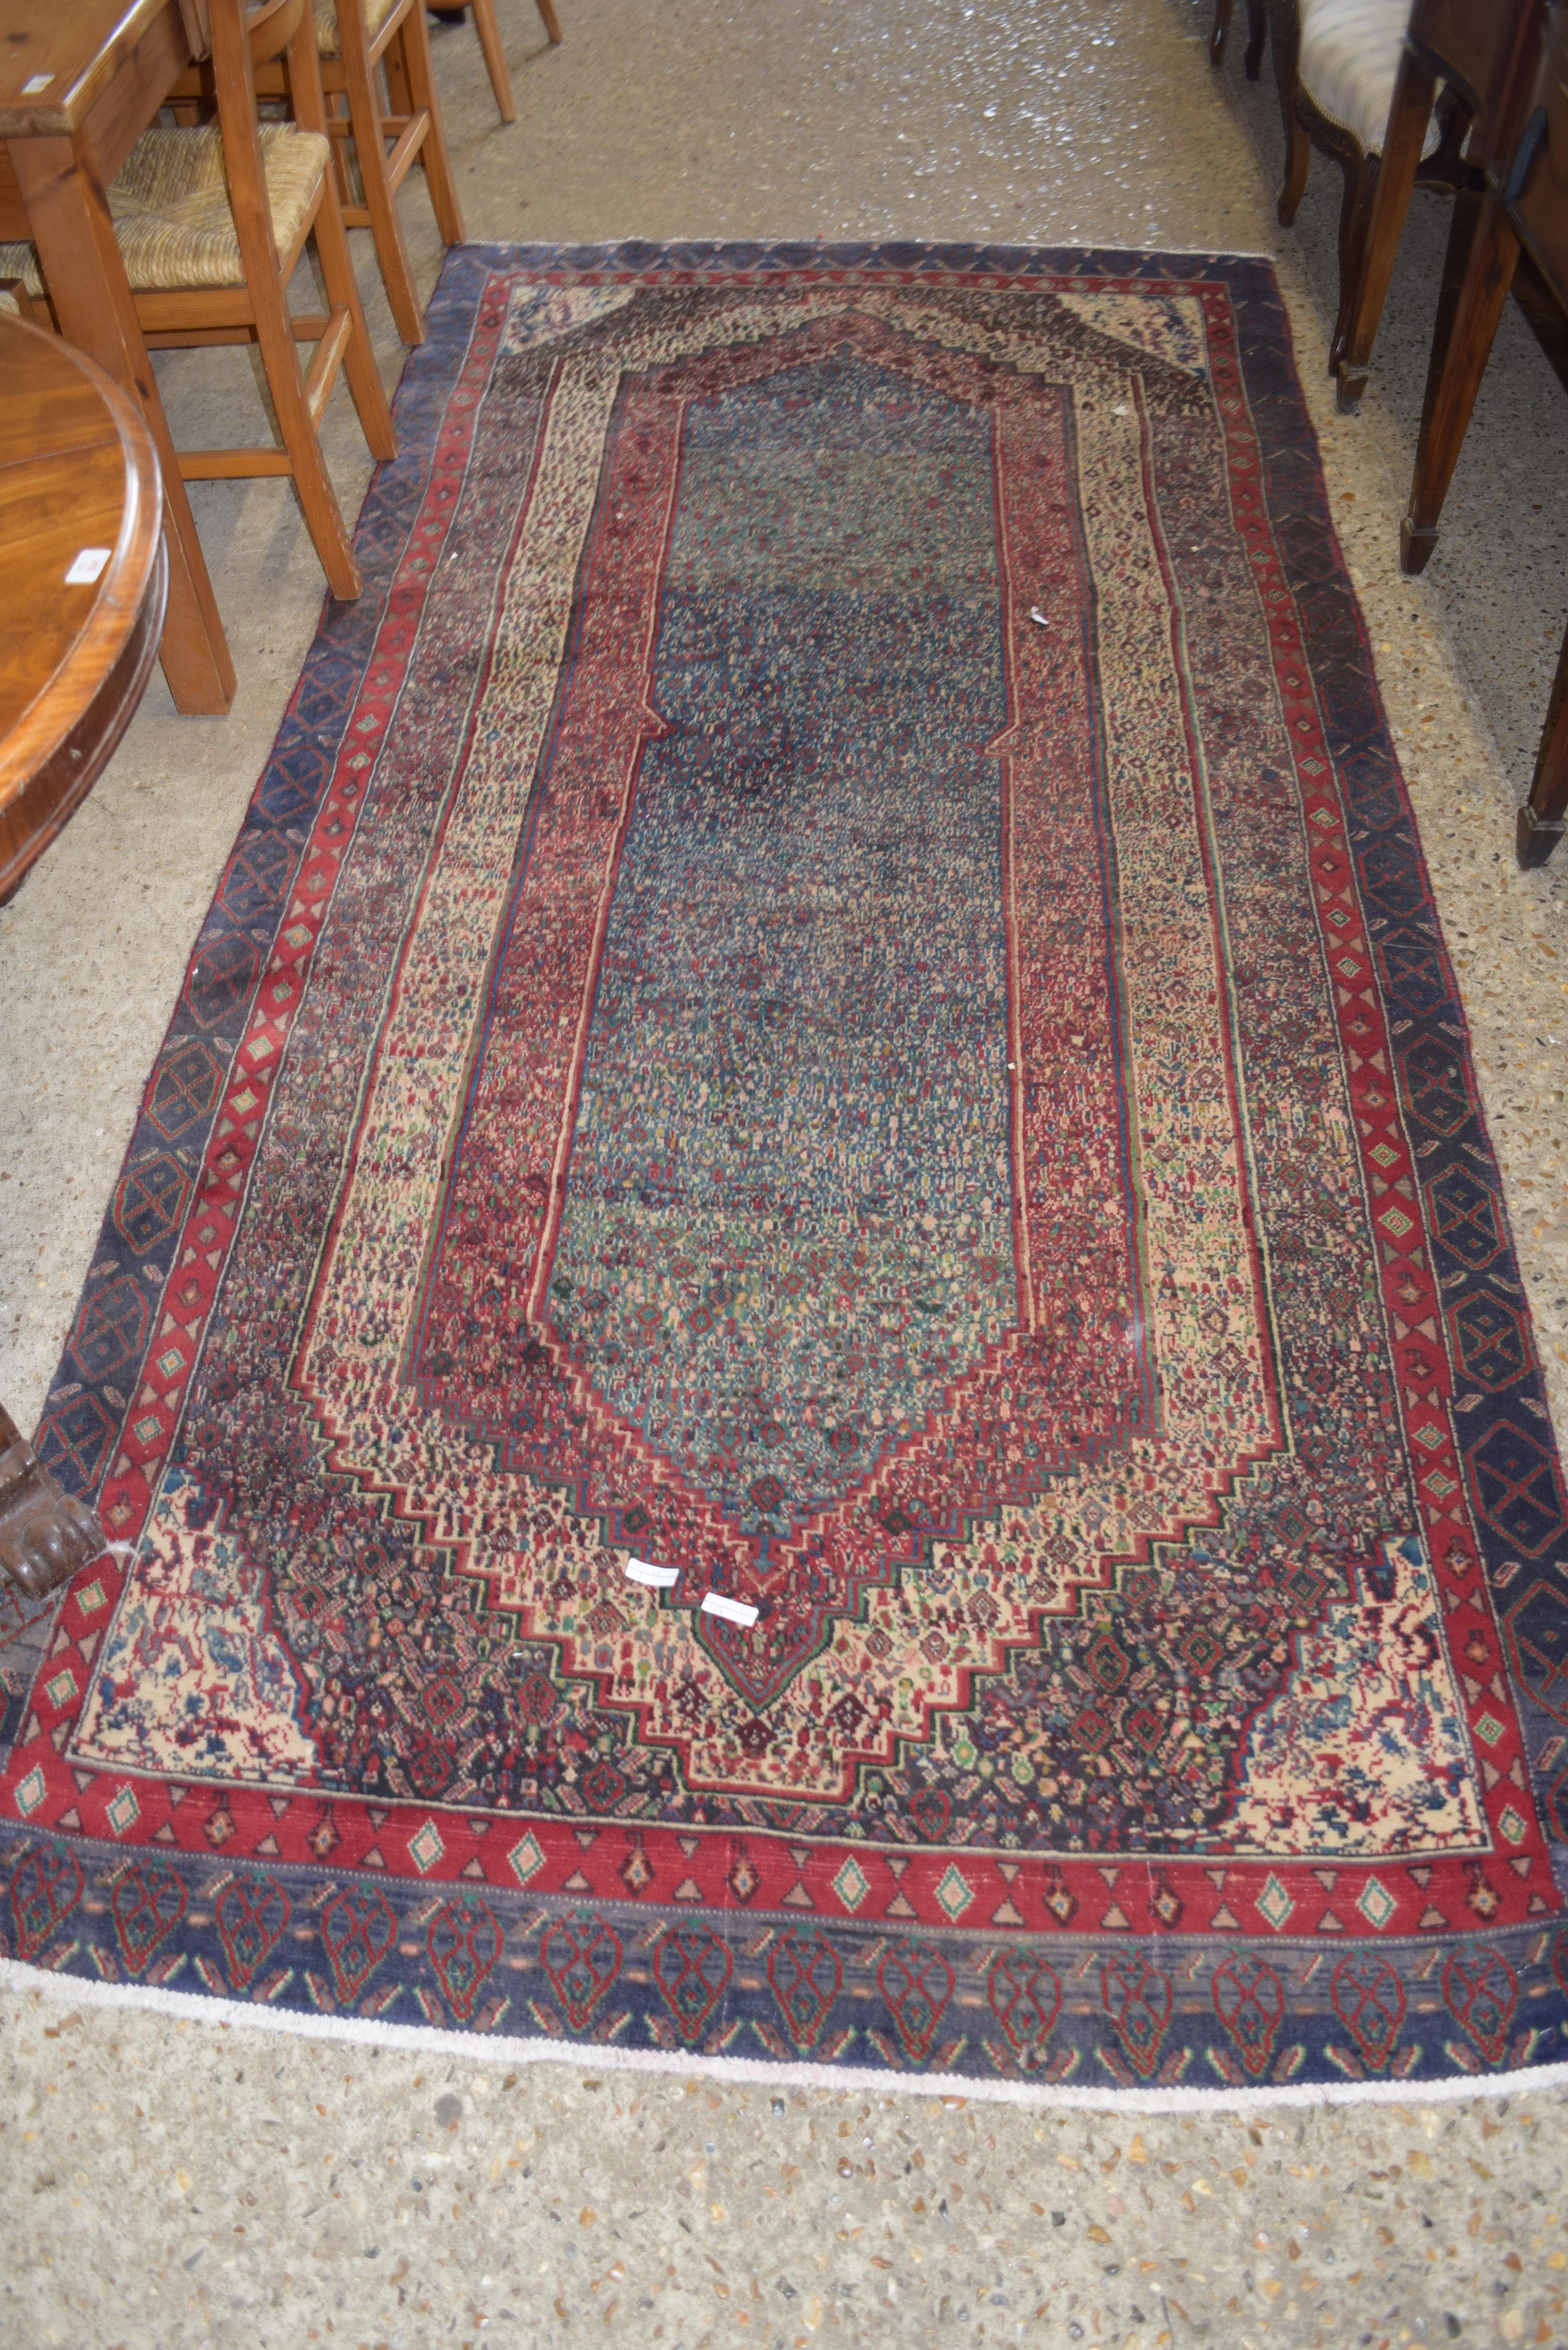 MODERN WOOL FLOOR RUG DECORATED WITH LARGE CENTRAL PANEL ON A PRINCIPALLY RED AND BLUE BACKGROUND,